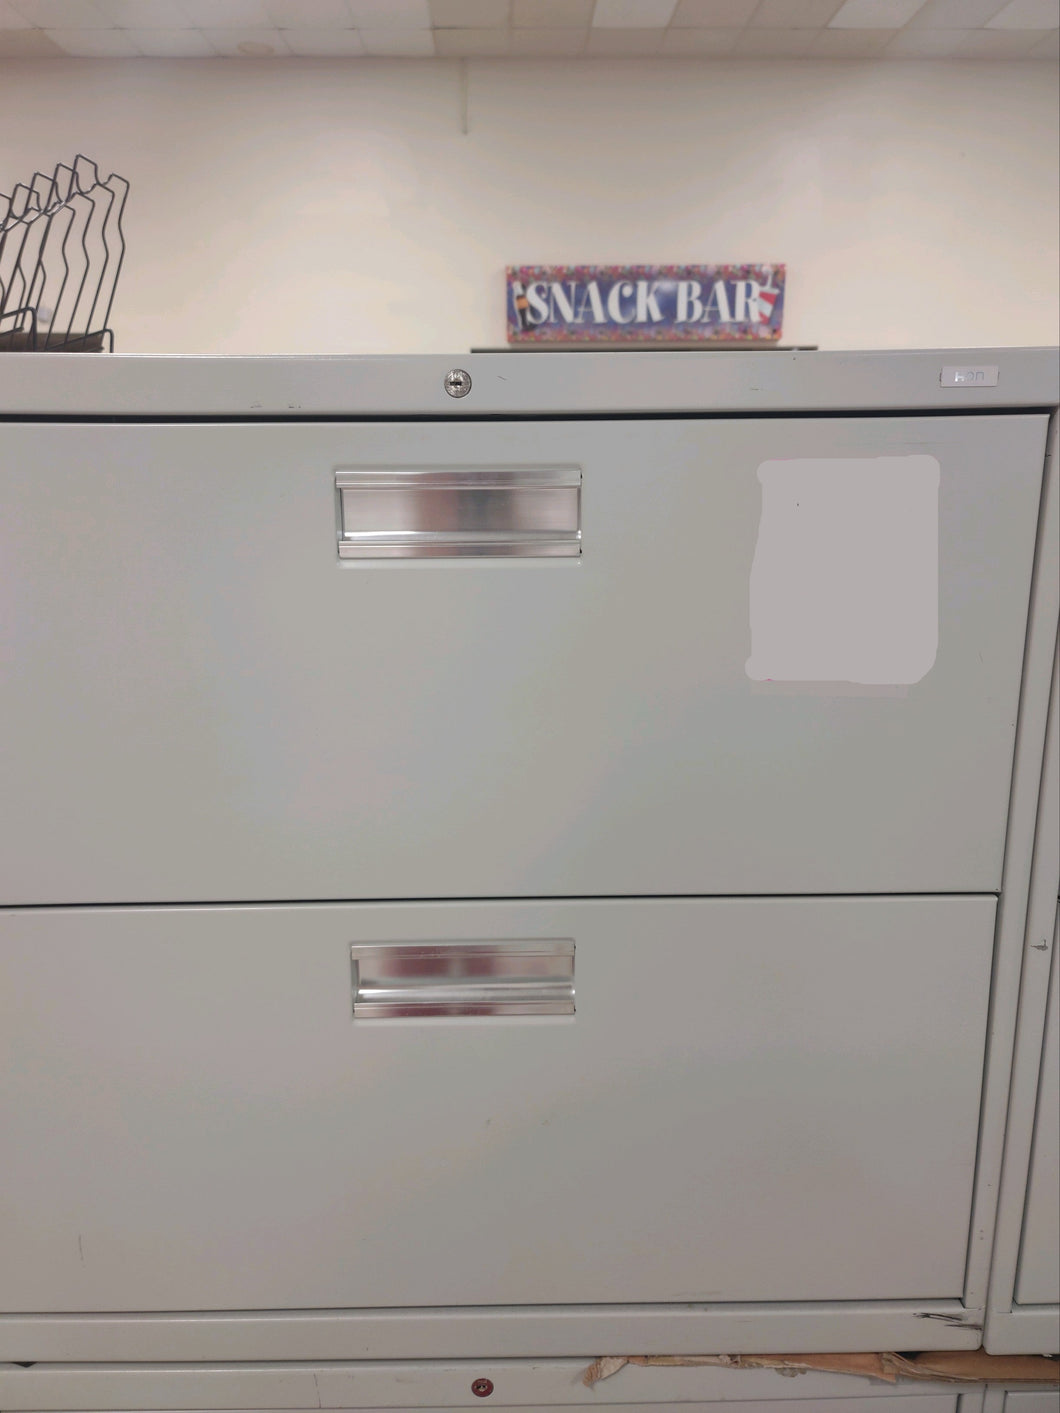 R8803 HON Metal 2 Drawer USED Lateral File $74.98 - 1 Only!